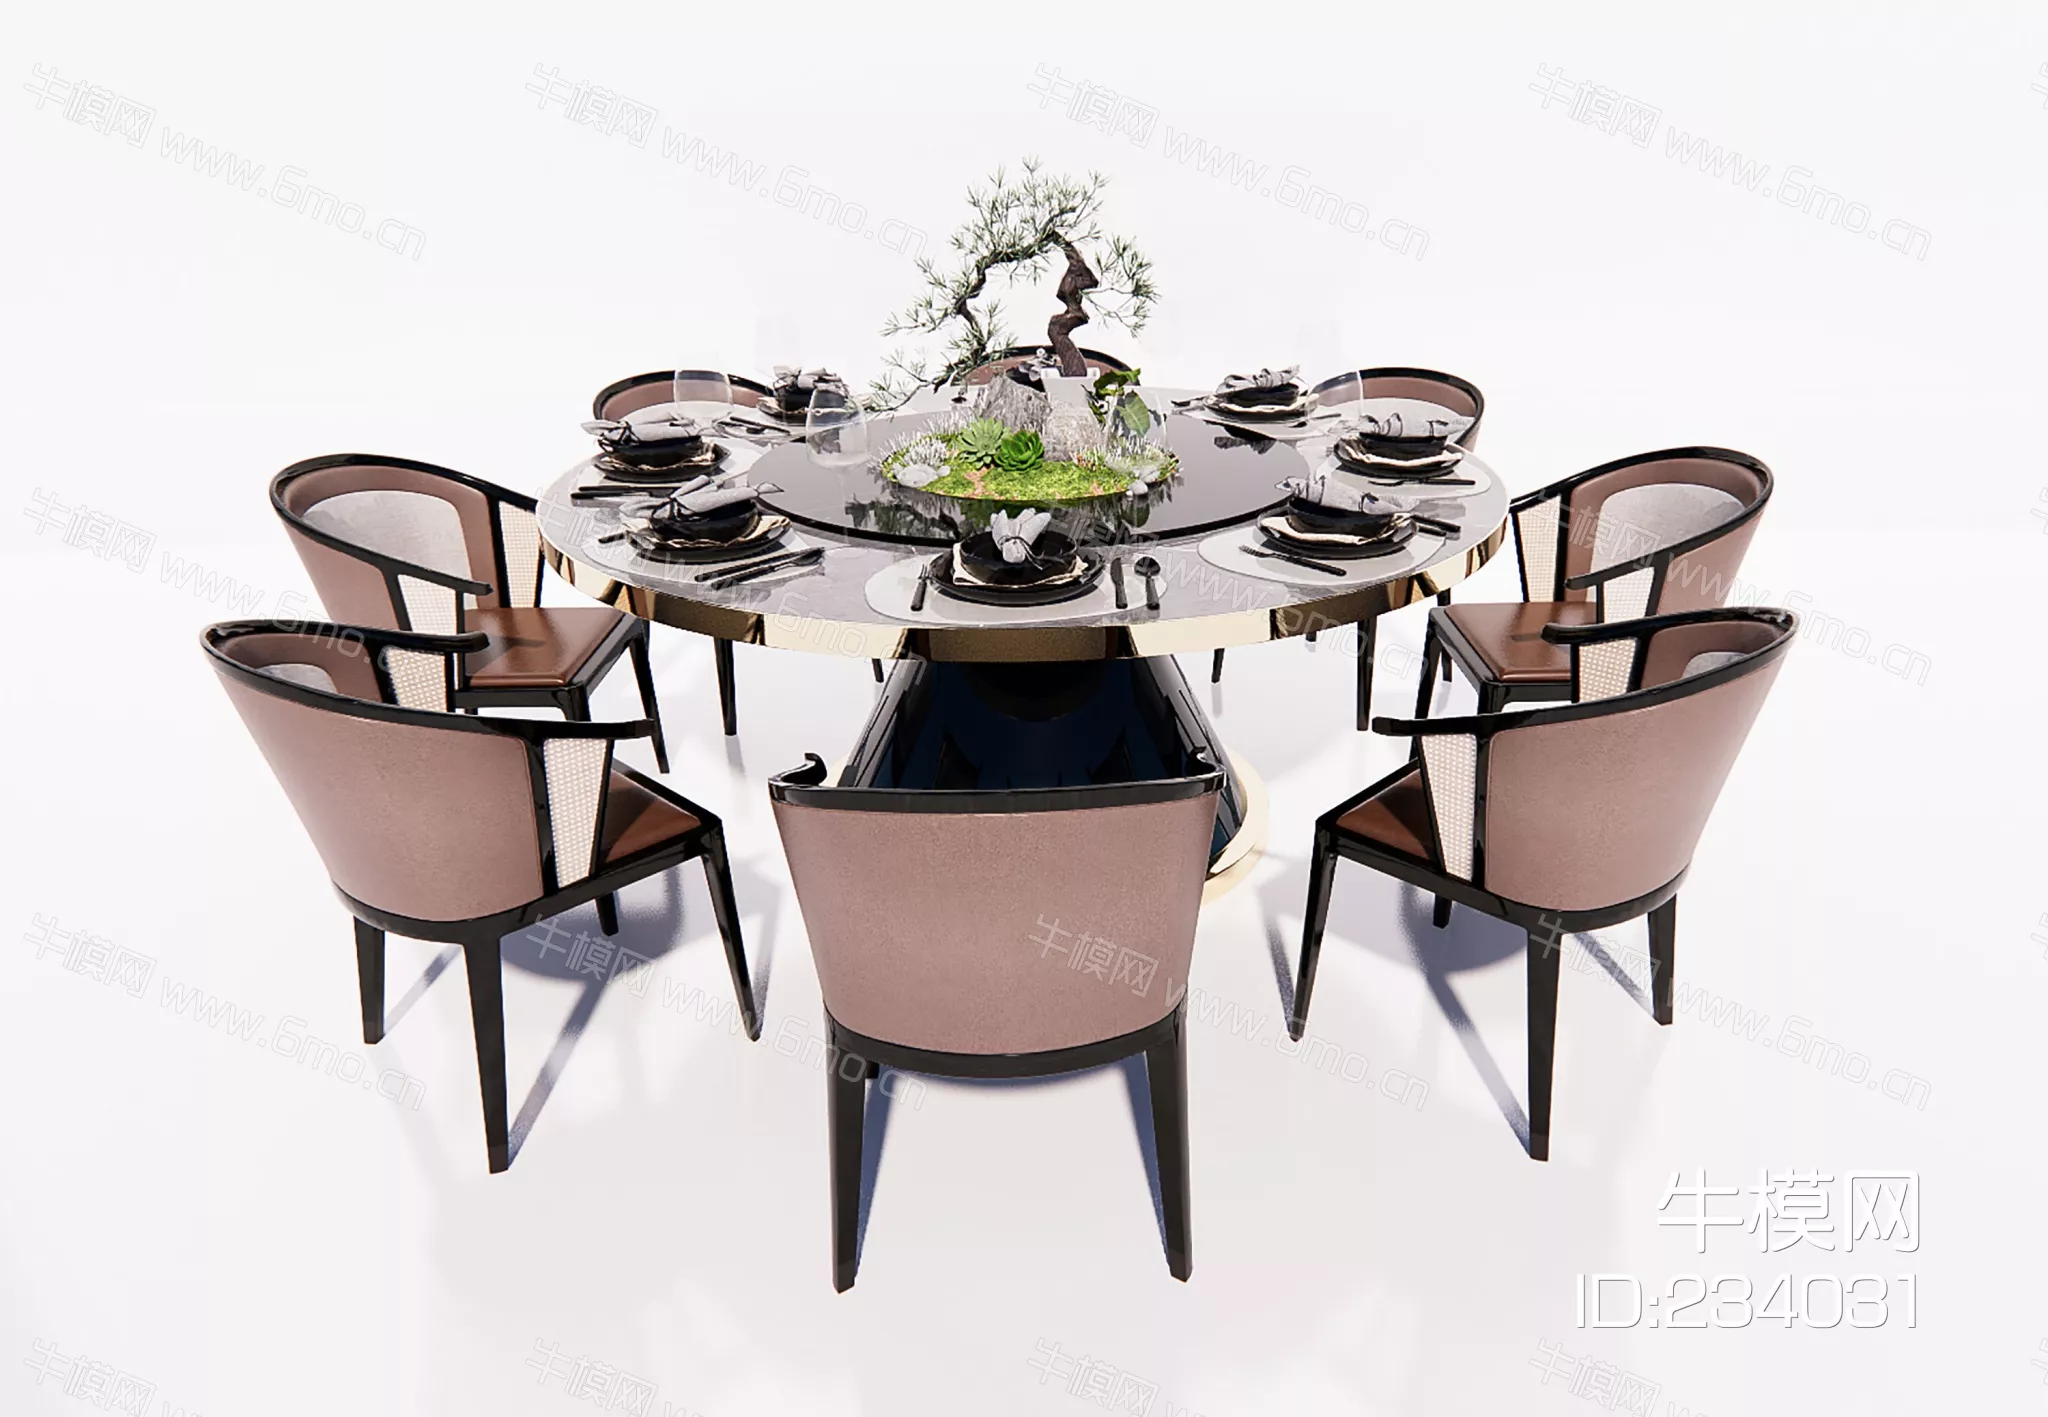 CHINESE DINING TABLE SET - SKETCHUP 3D MODEL - ENSCAPE - 234031